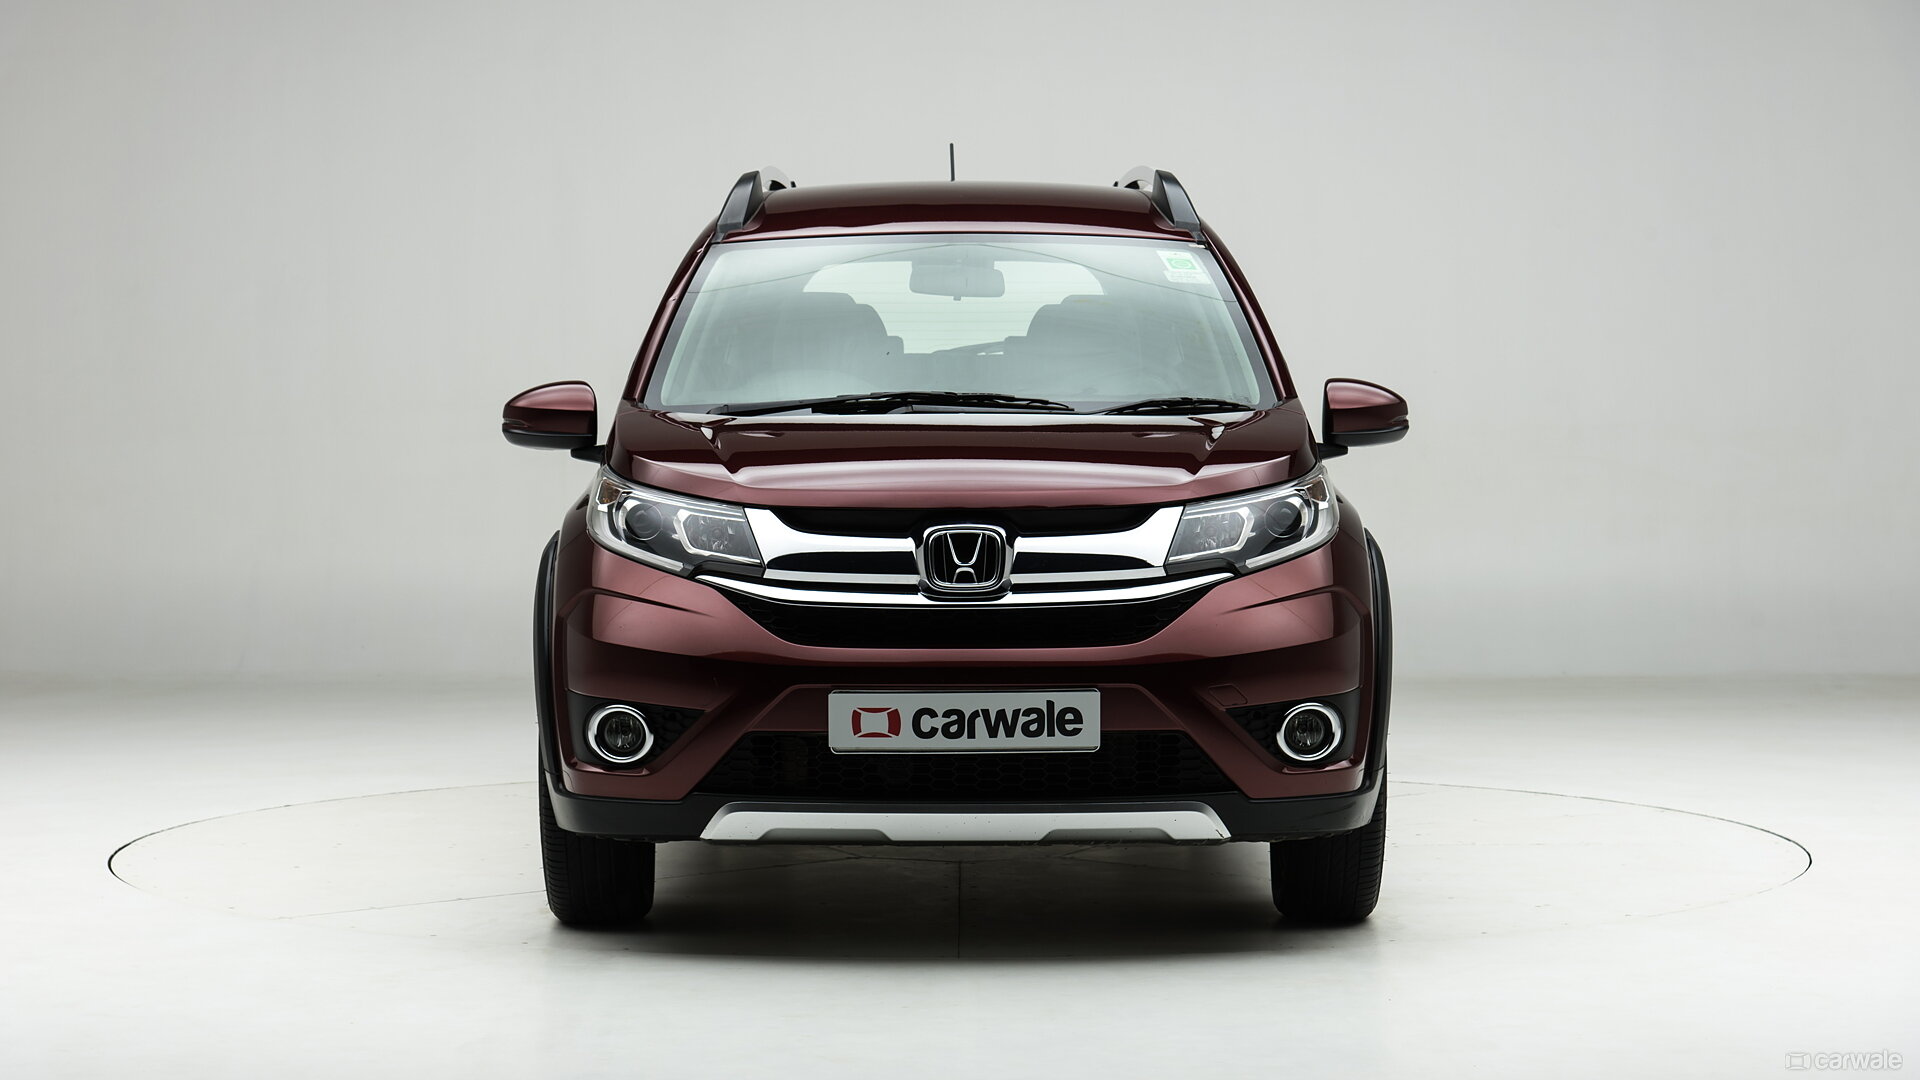 BRV Front View Image, BRV Photos in India CarWale